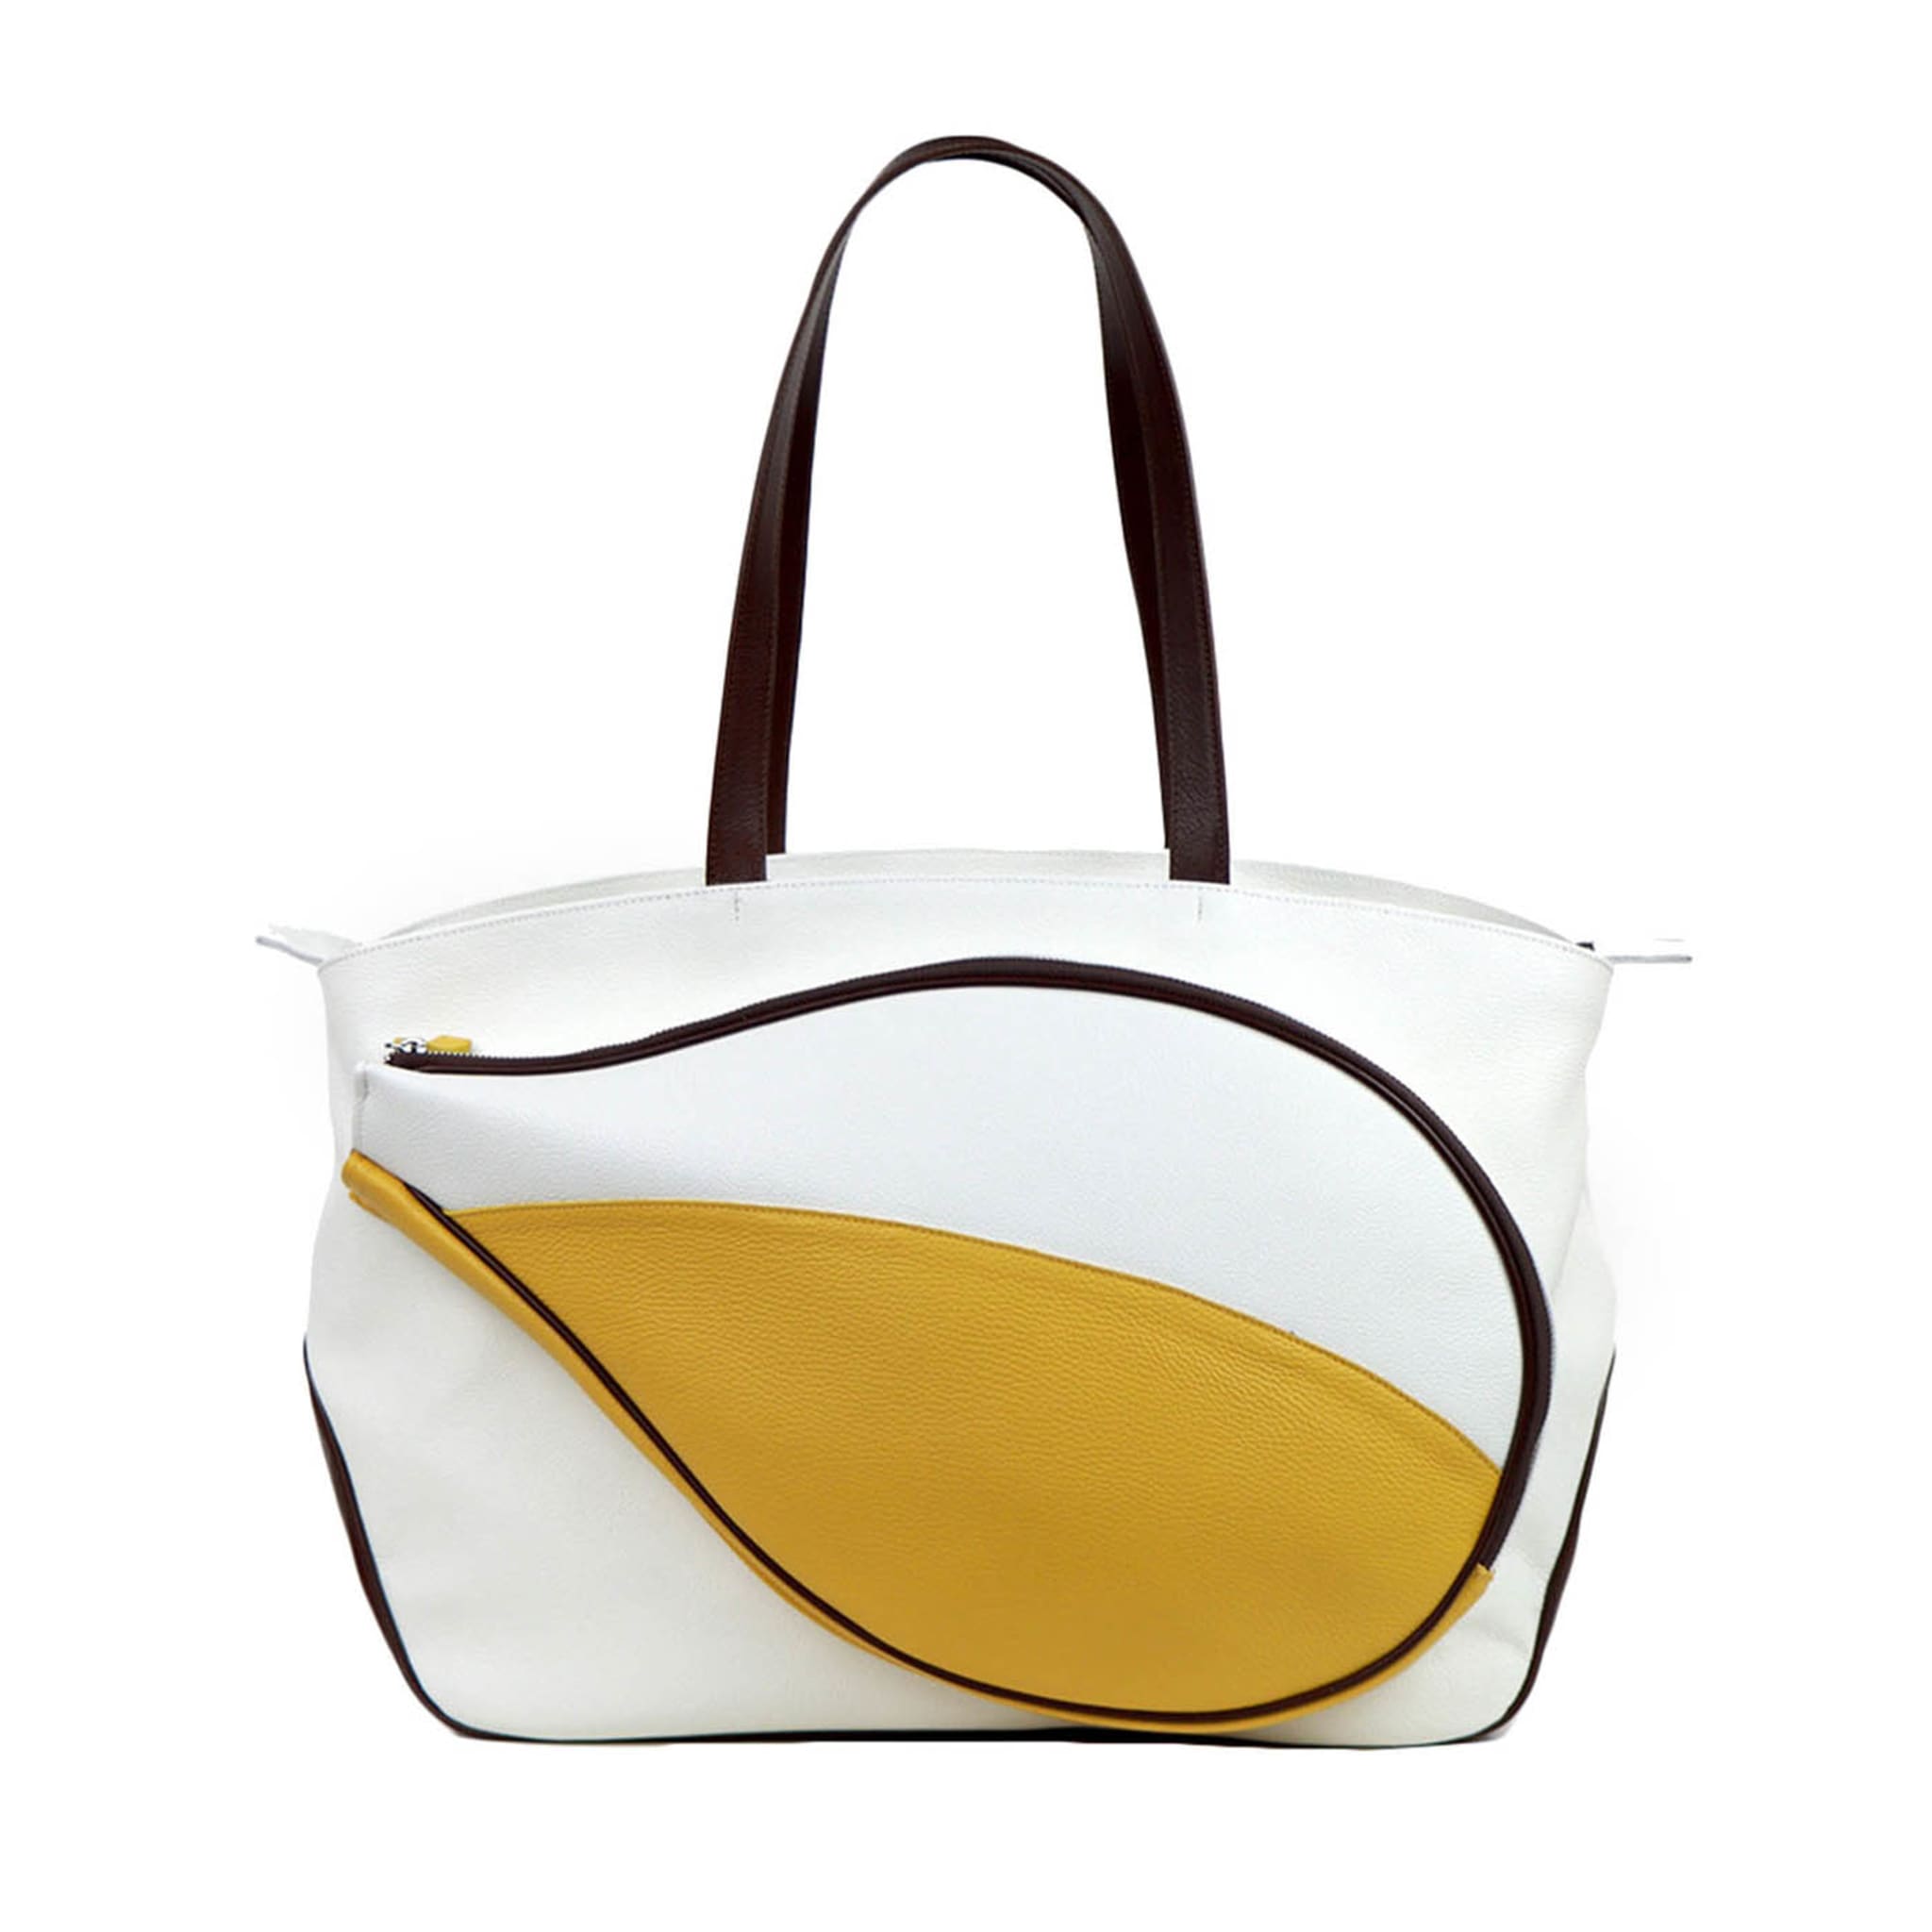 Sport White/Yellow/Brown Bag with Tennis-Racket-Shaped Pocket - Main view